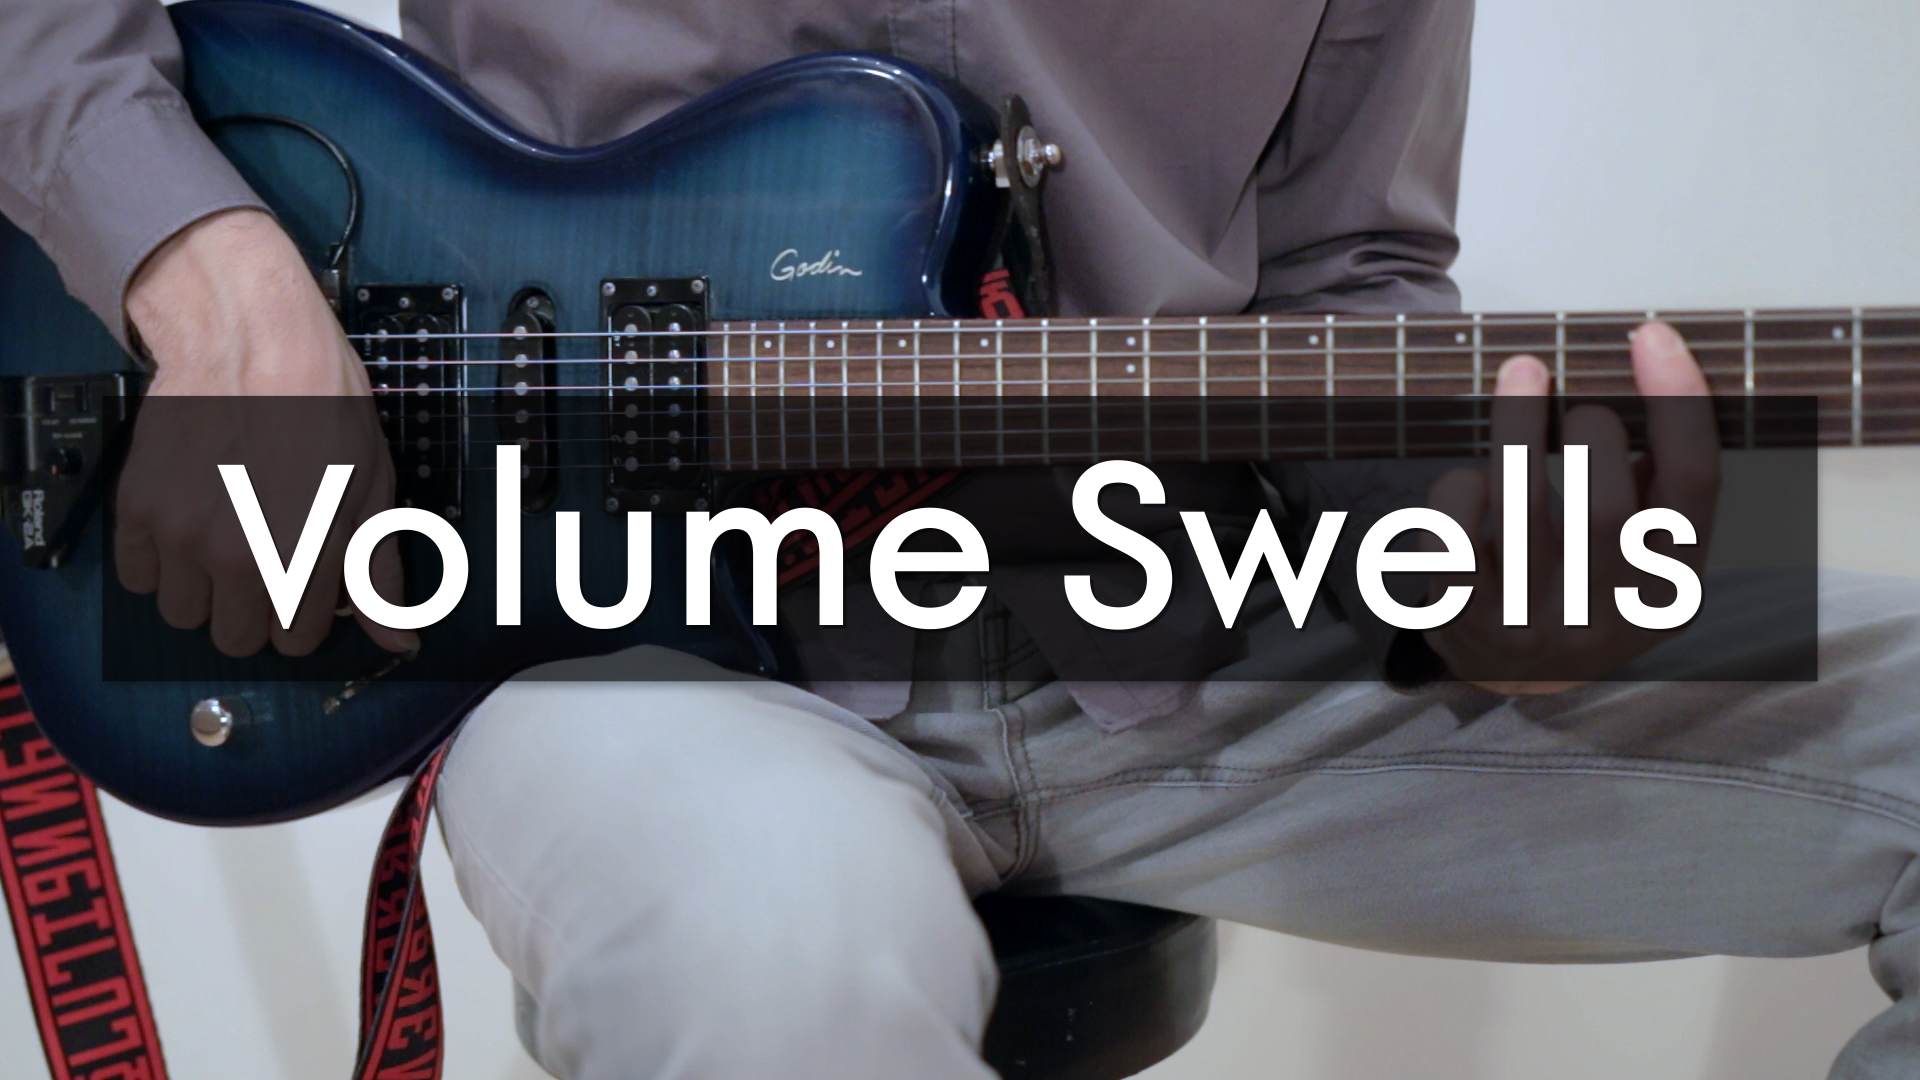 How to play Ambient guitar volume Swells